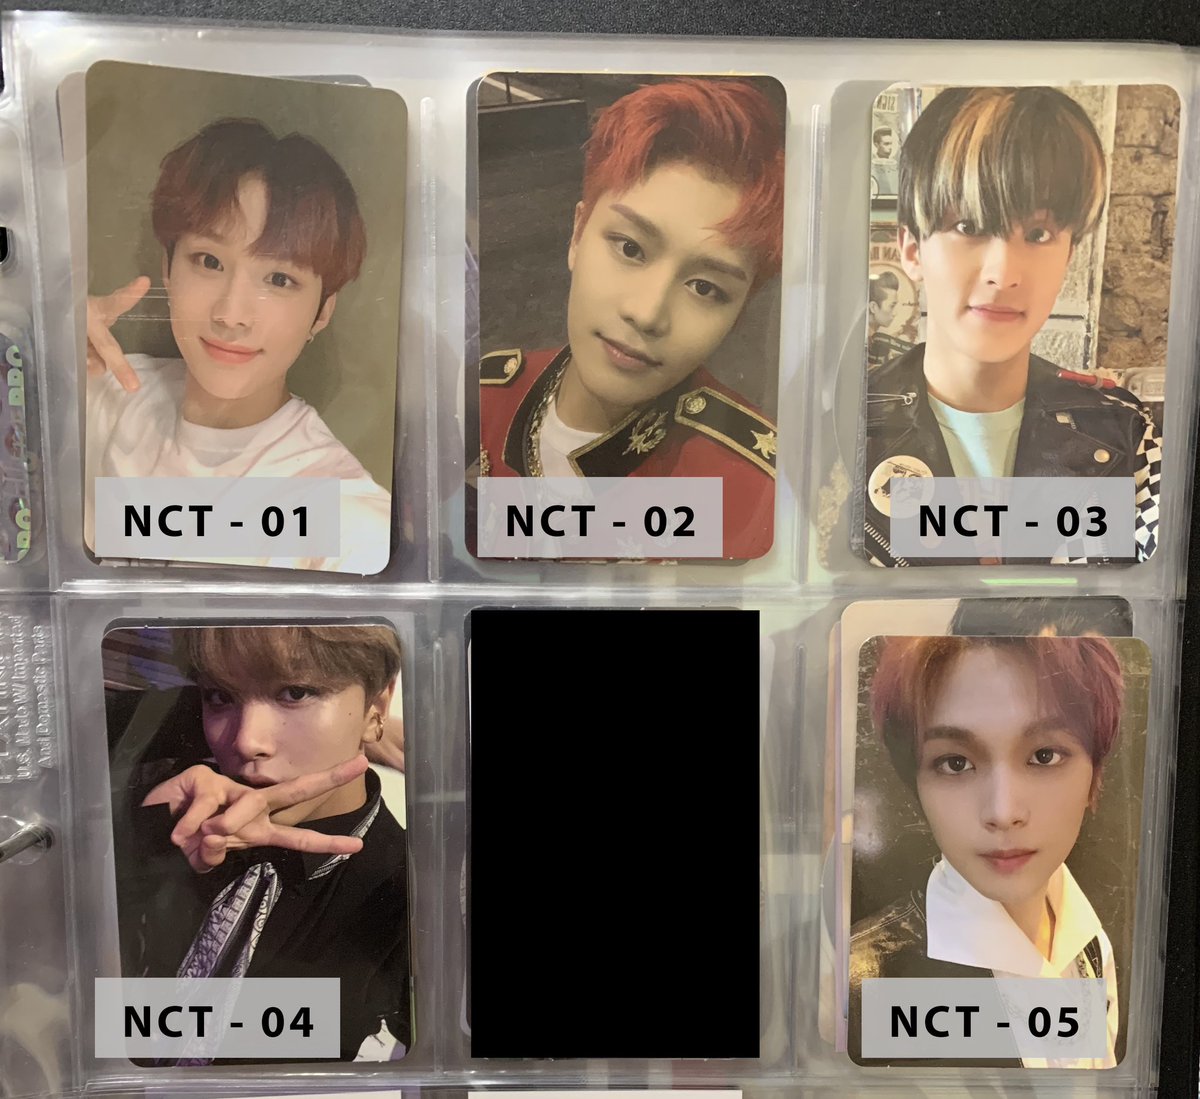 wts lfb ph on hand exo nct rv superm sf9 pc unsealed album postcard posterReply with “mine + code”, or “mine for (@/username) + code”jungwoo taeil mark haechan xiojun lucas chenle hendery pc photocard access card circle card cc yearbook card ybc